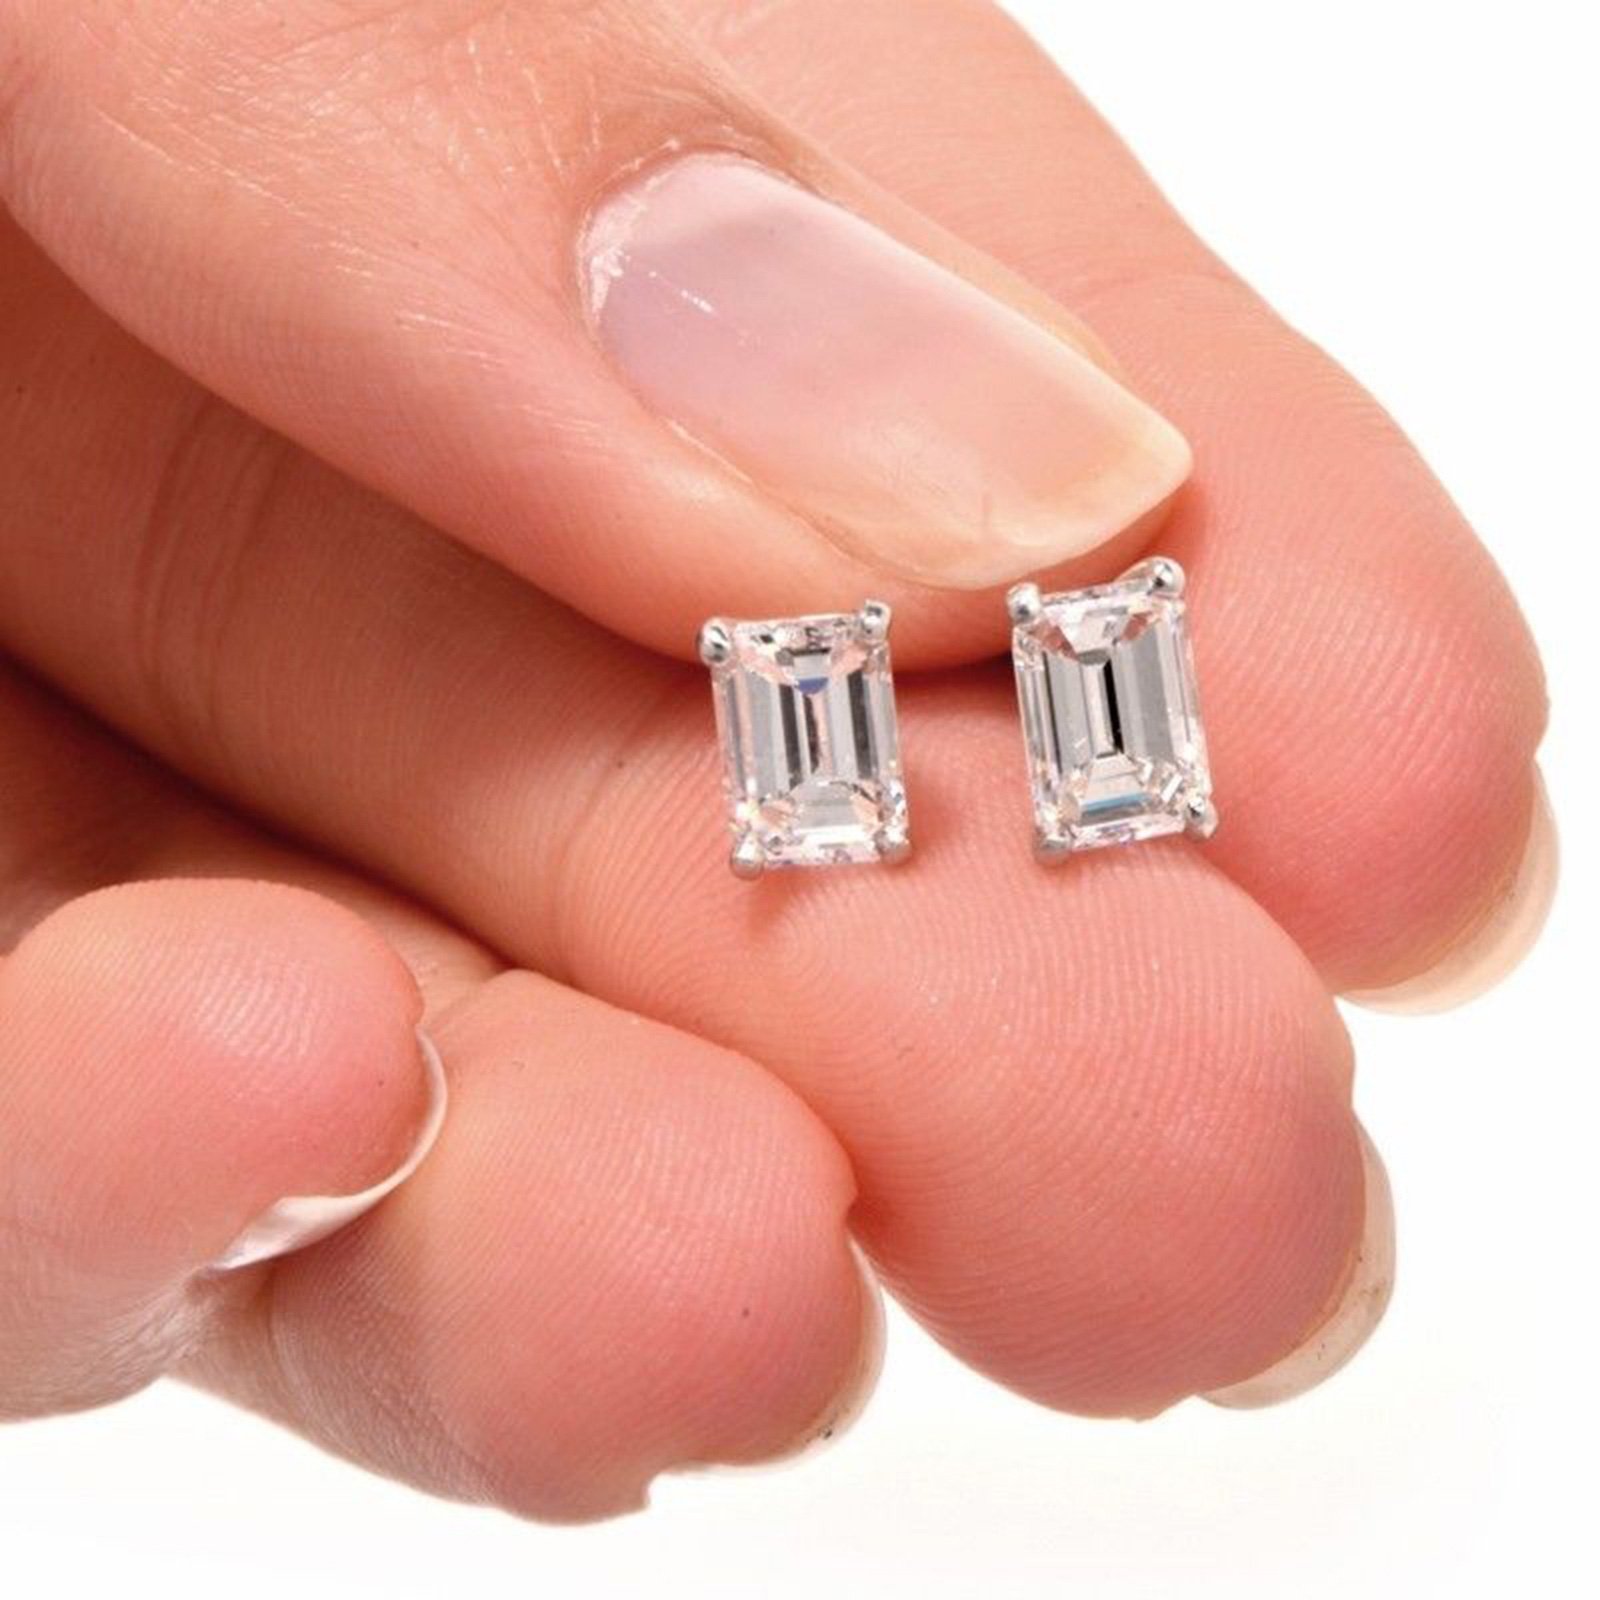 2.20 CT Emerald Cut Conflict-Free VVS1 Ideal Gemstone April Birthstone designer Simulated Diamond Solitaire Stud Earrings in Solid 14k White Gold Screw Back